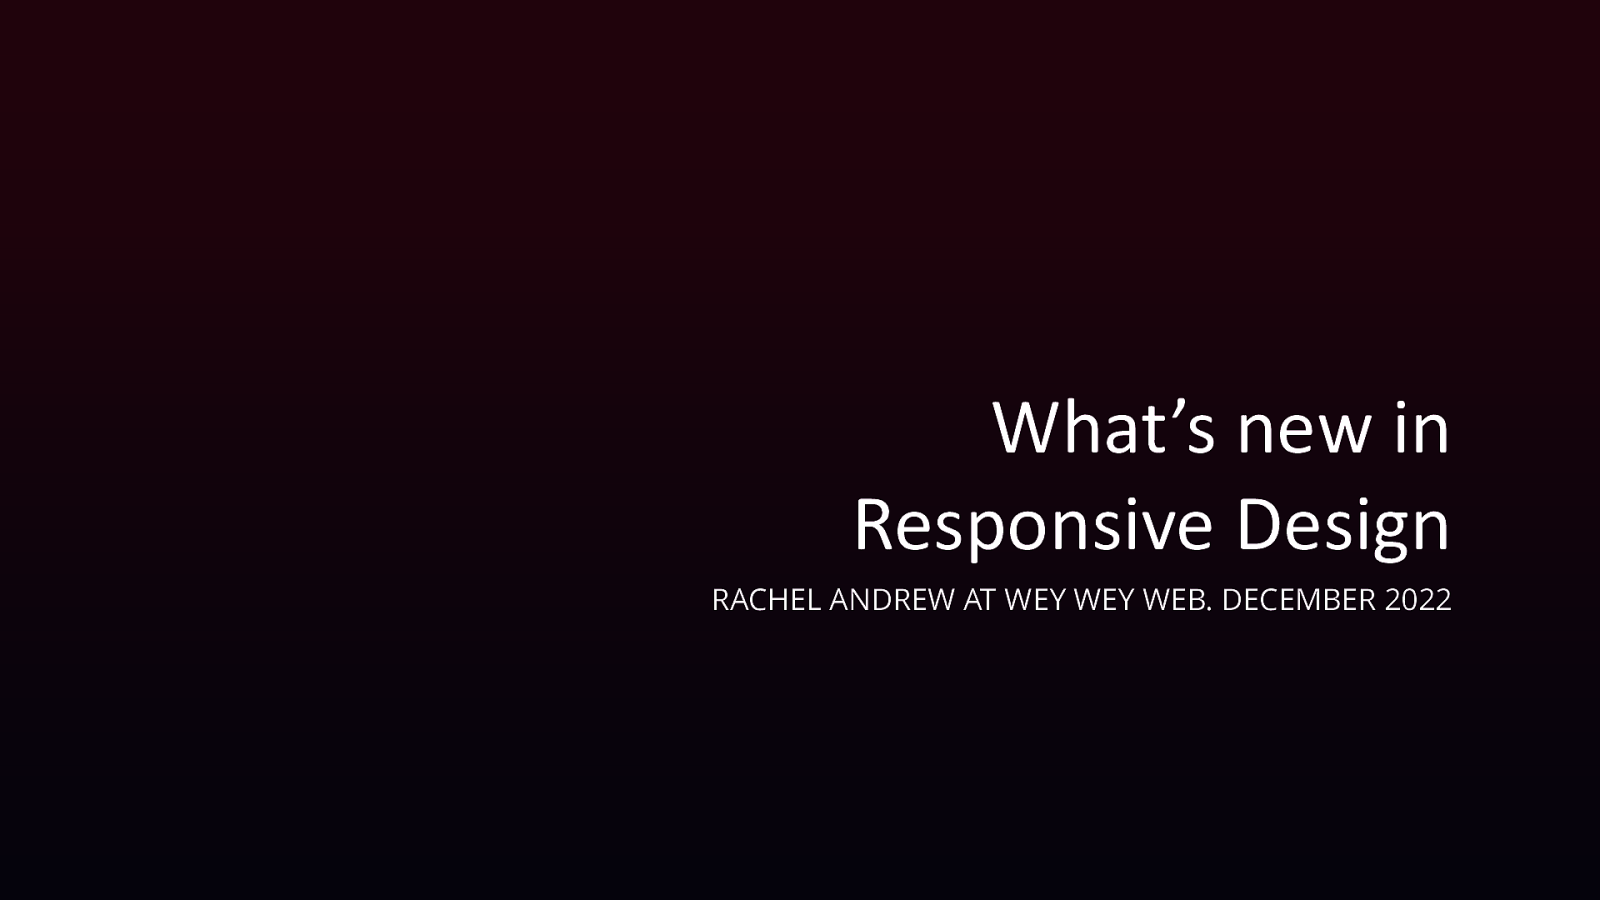 What’s new in Responsive Design